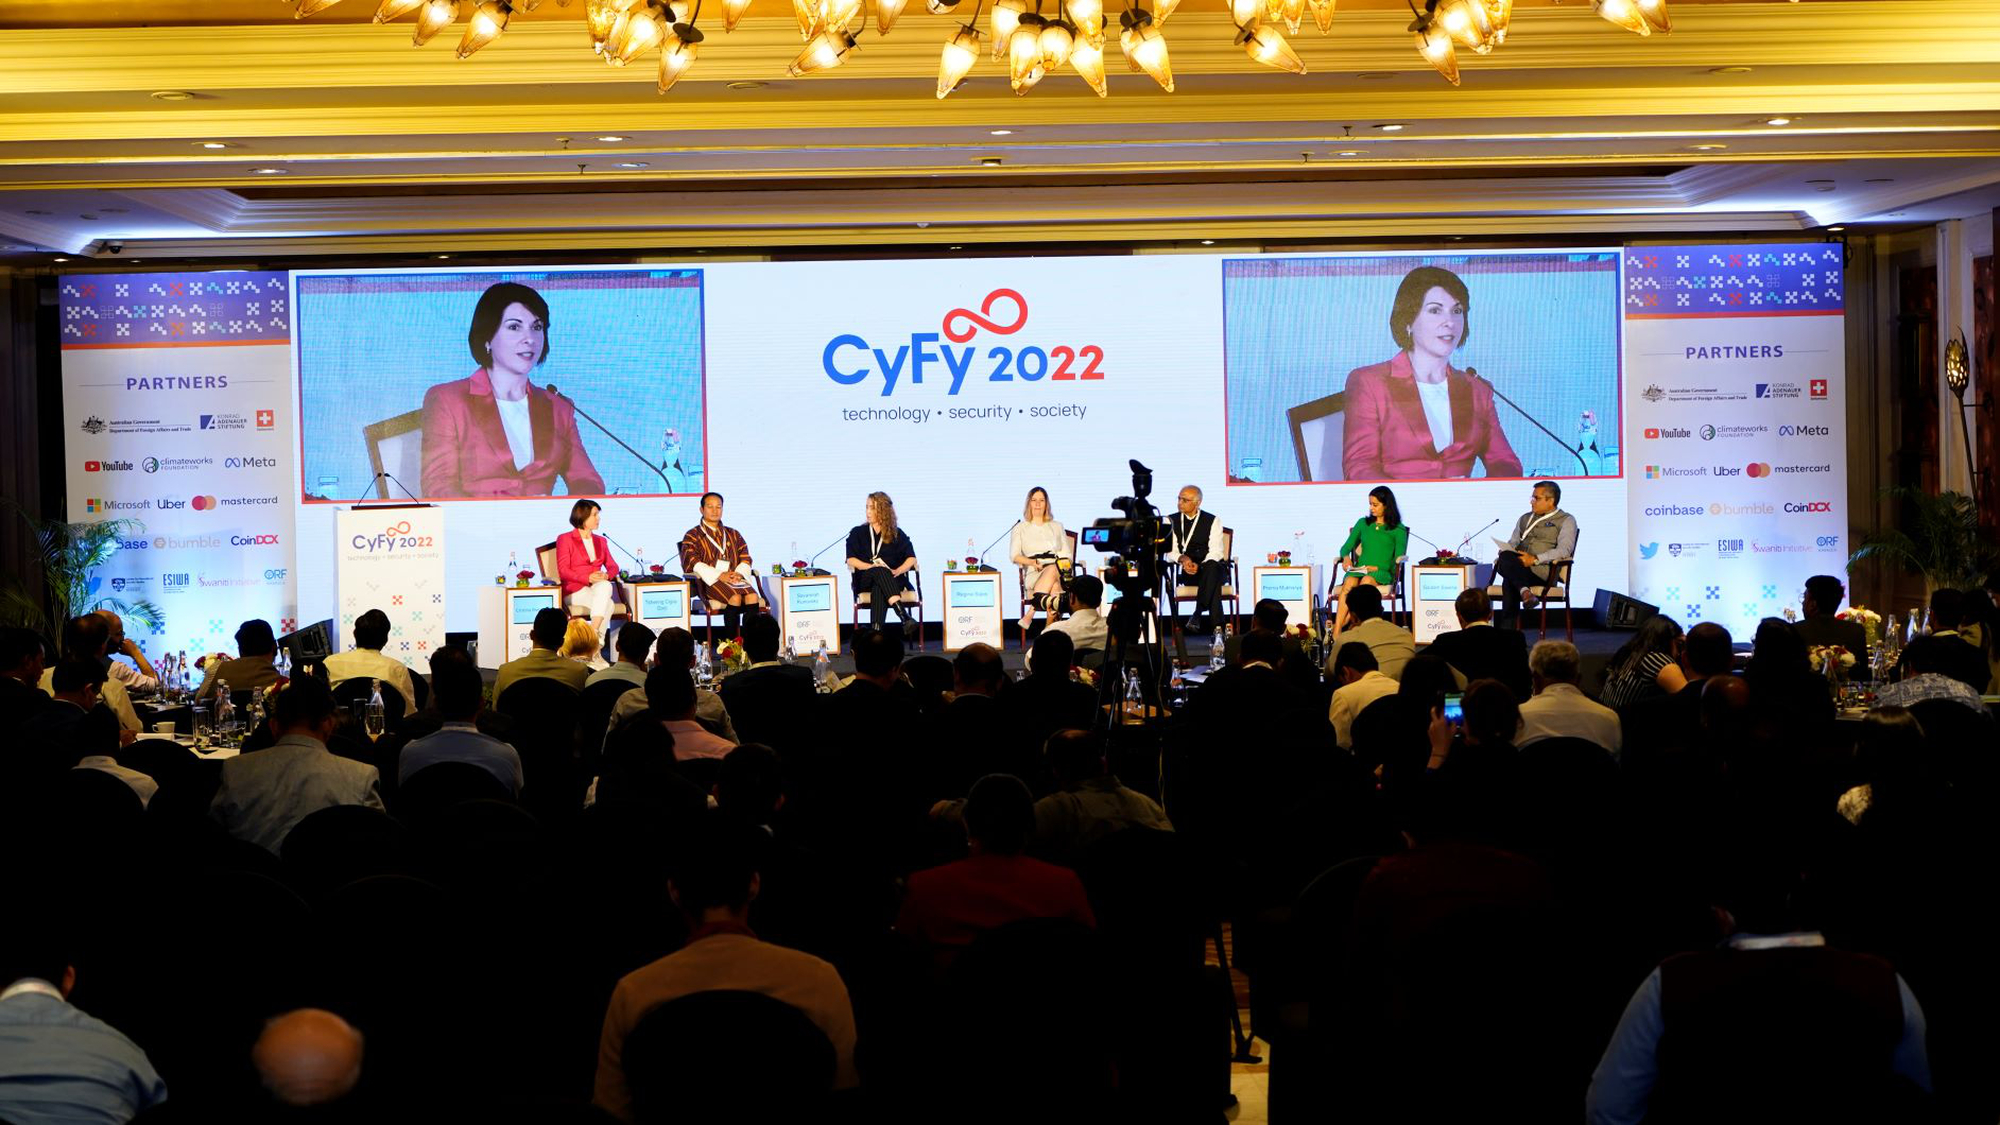 Christina Riesen speaking at the CyFy 2022